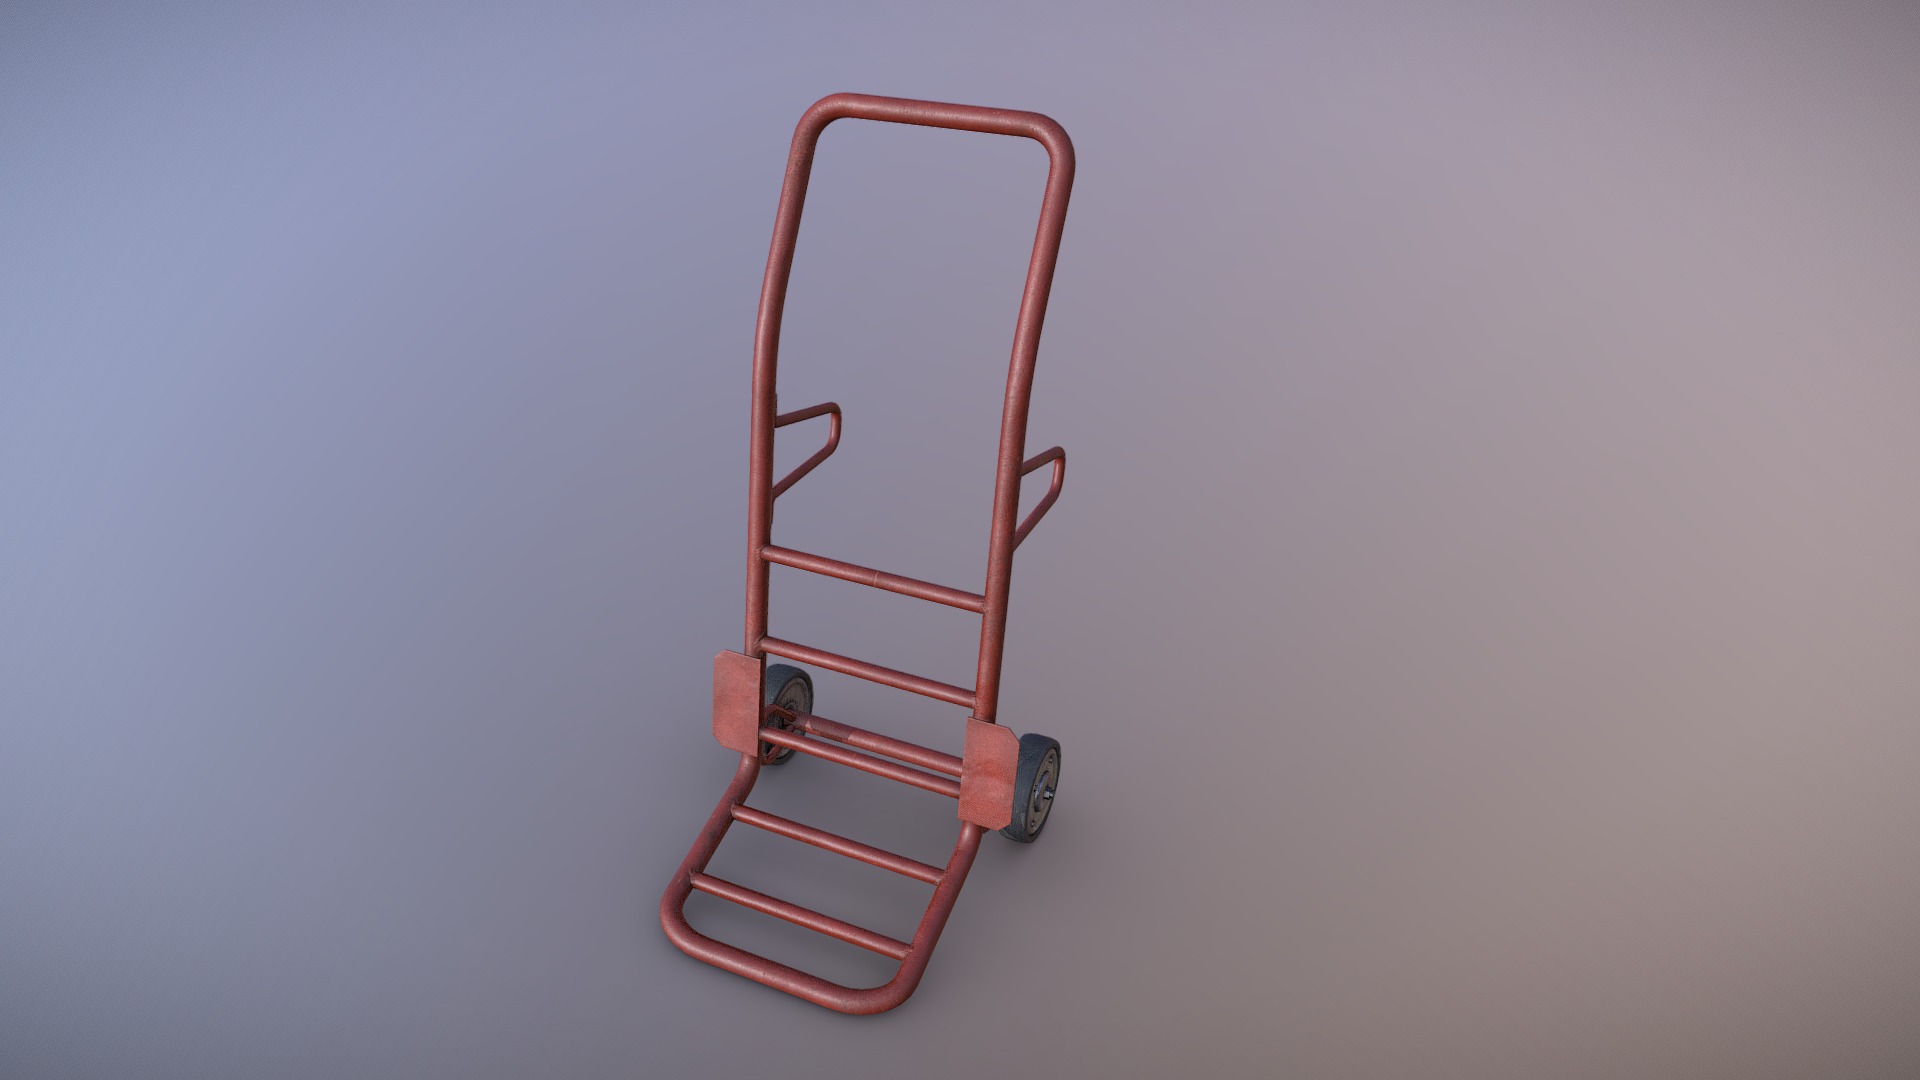 3D model Game Ready Hand Truck – For Sale - This is a 3D model of the Game Ready Hand Truck - For Sale. The 3D model is about a red chair with a metal frame.